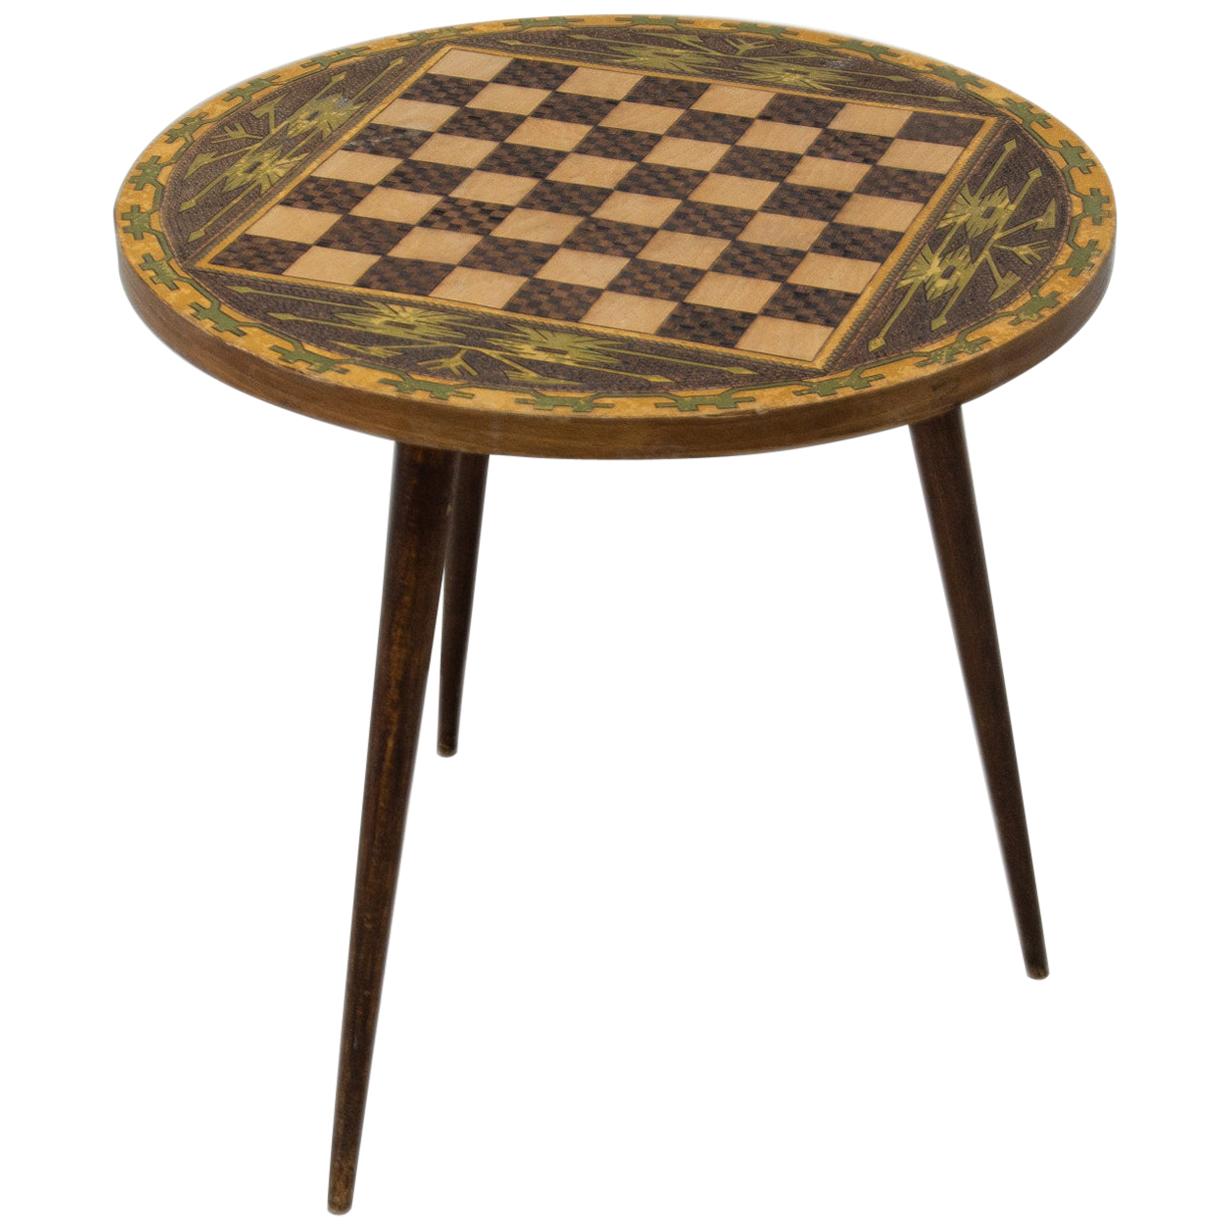 Vintage Round Side Table with Chess Pattern, 1970s, Albania